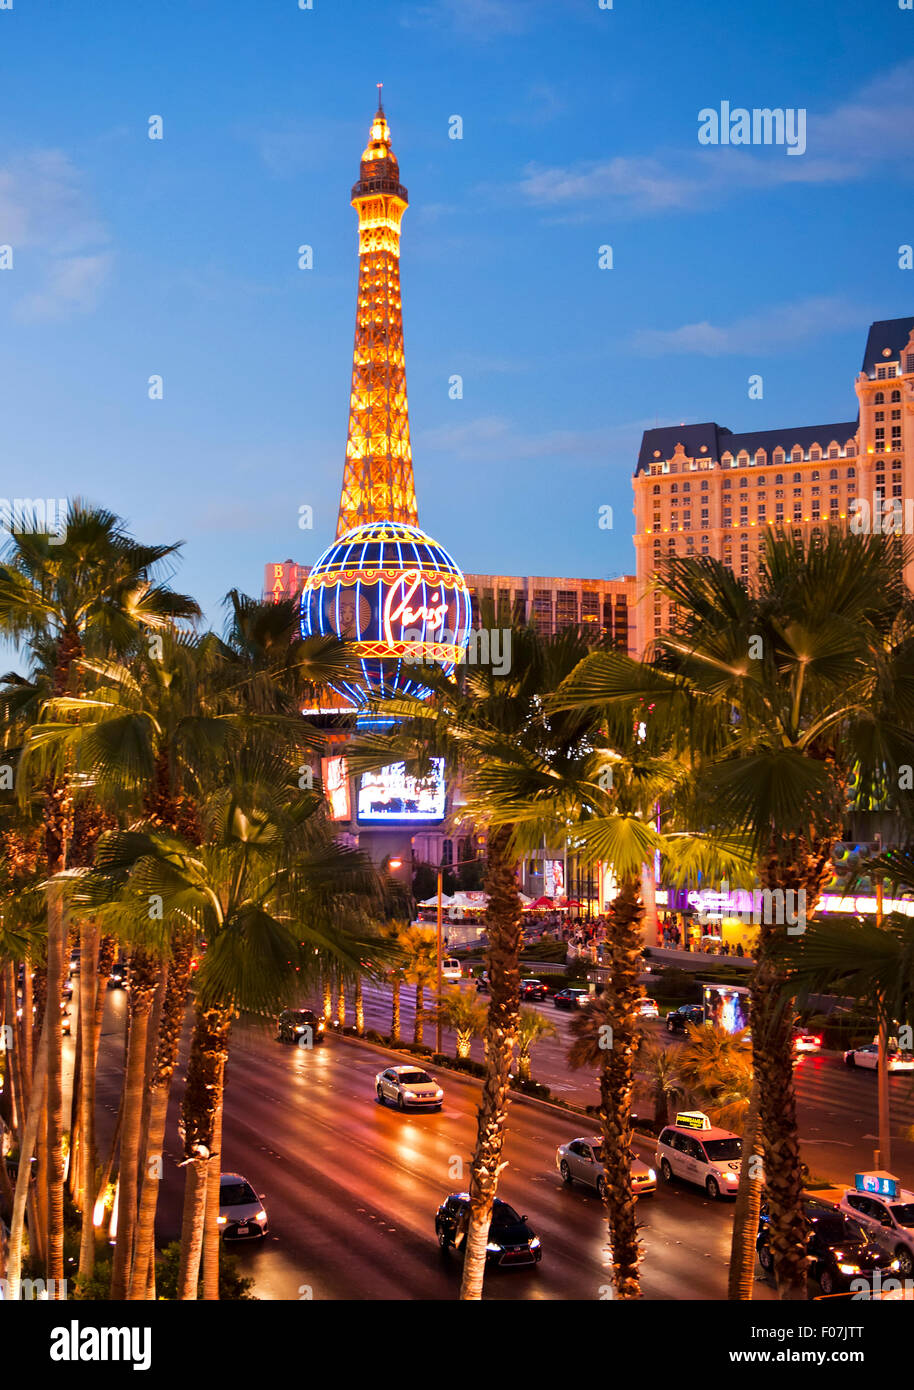 Paris Las Vegas is a French-themed casino hotel with a half-size Eiffel Tower located on the Strip Stock Photo